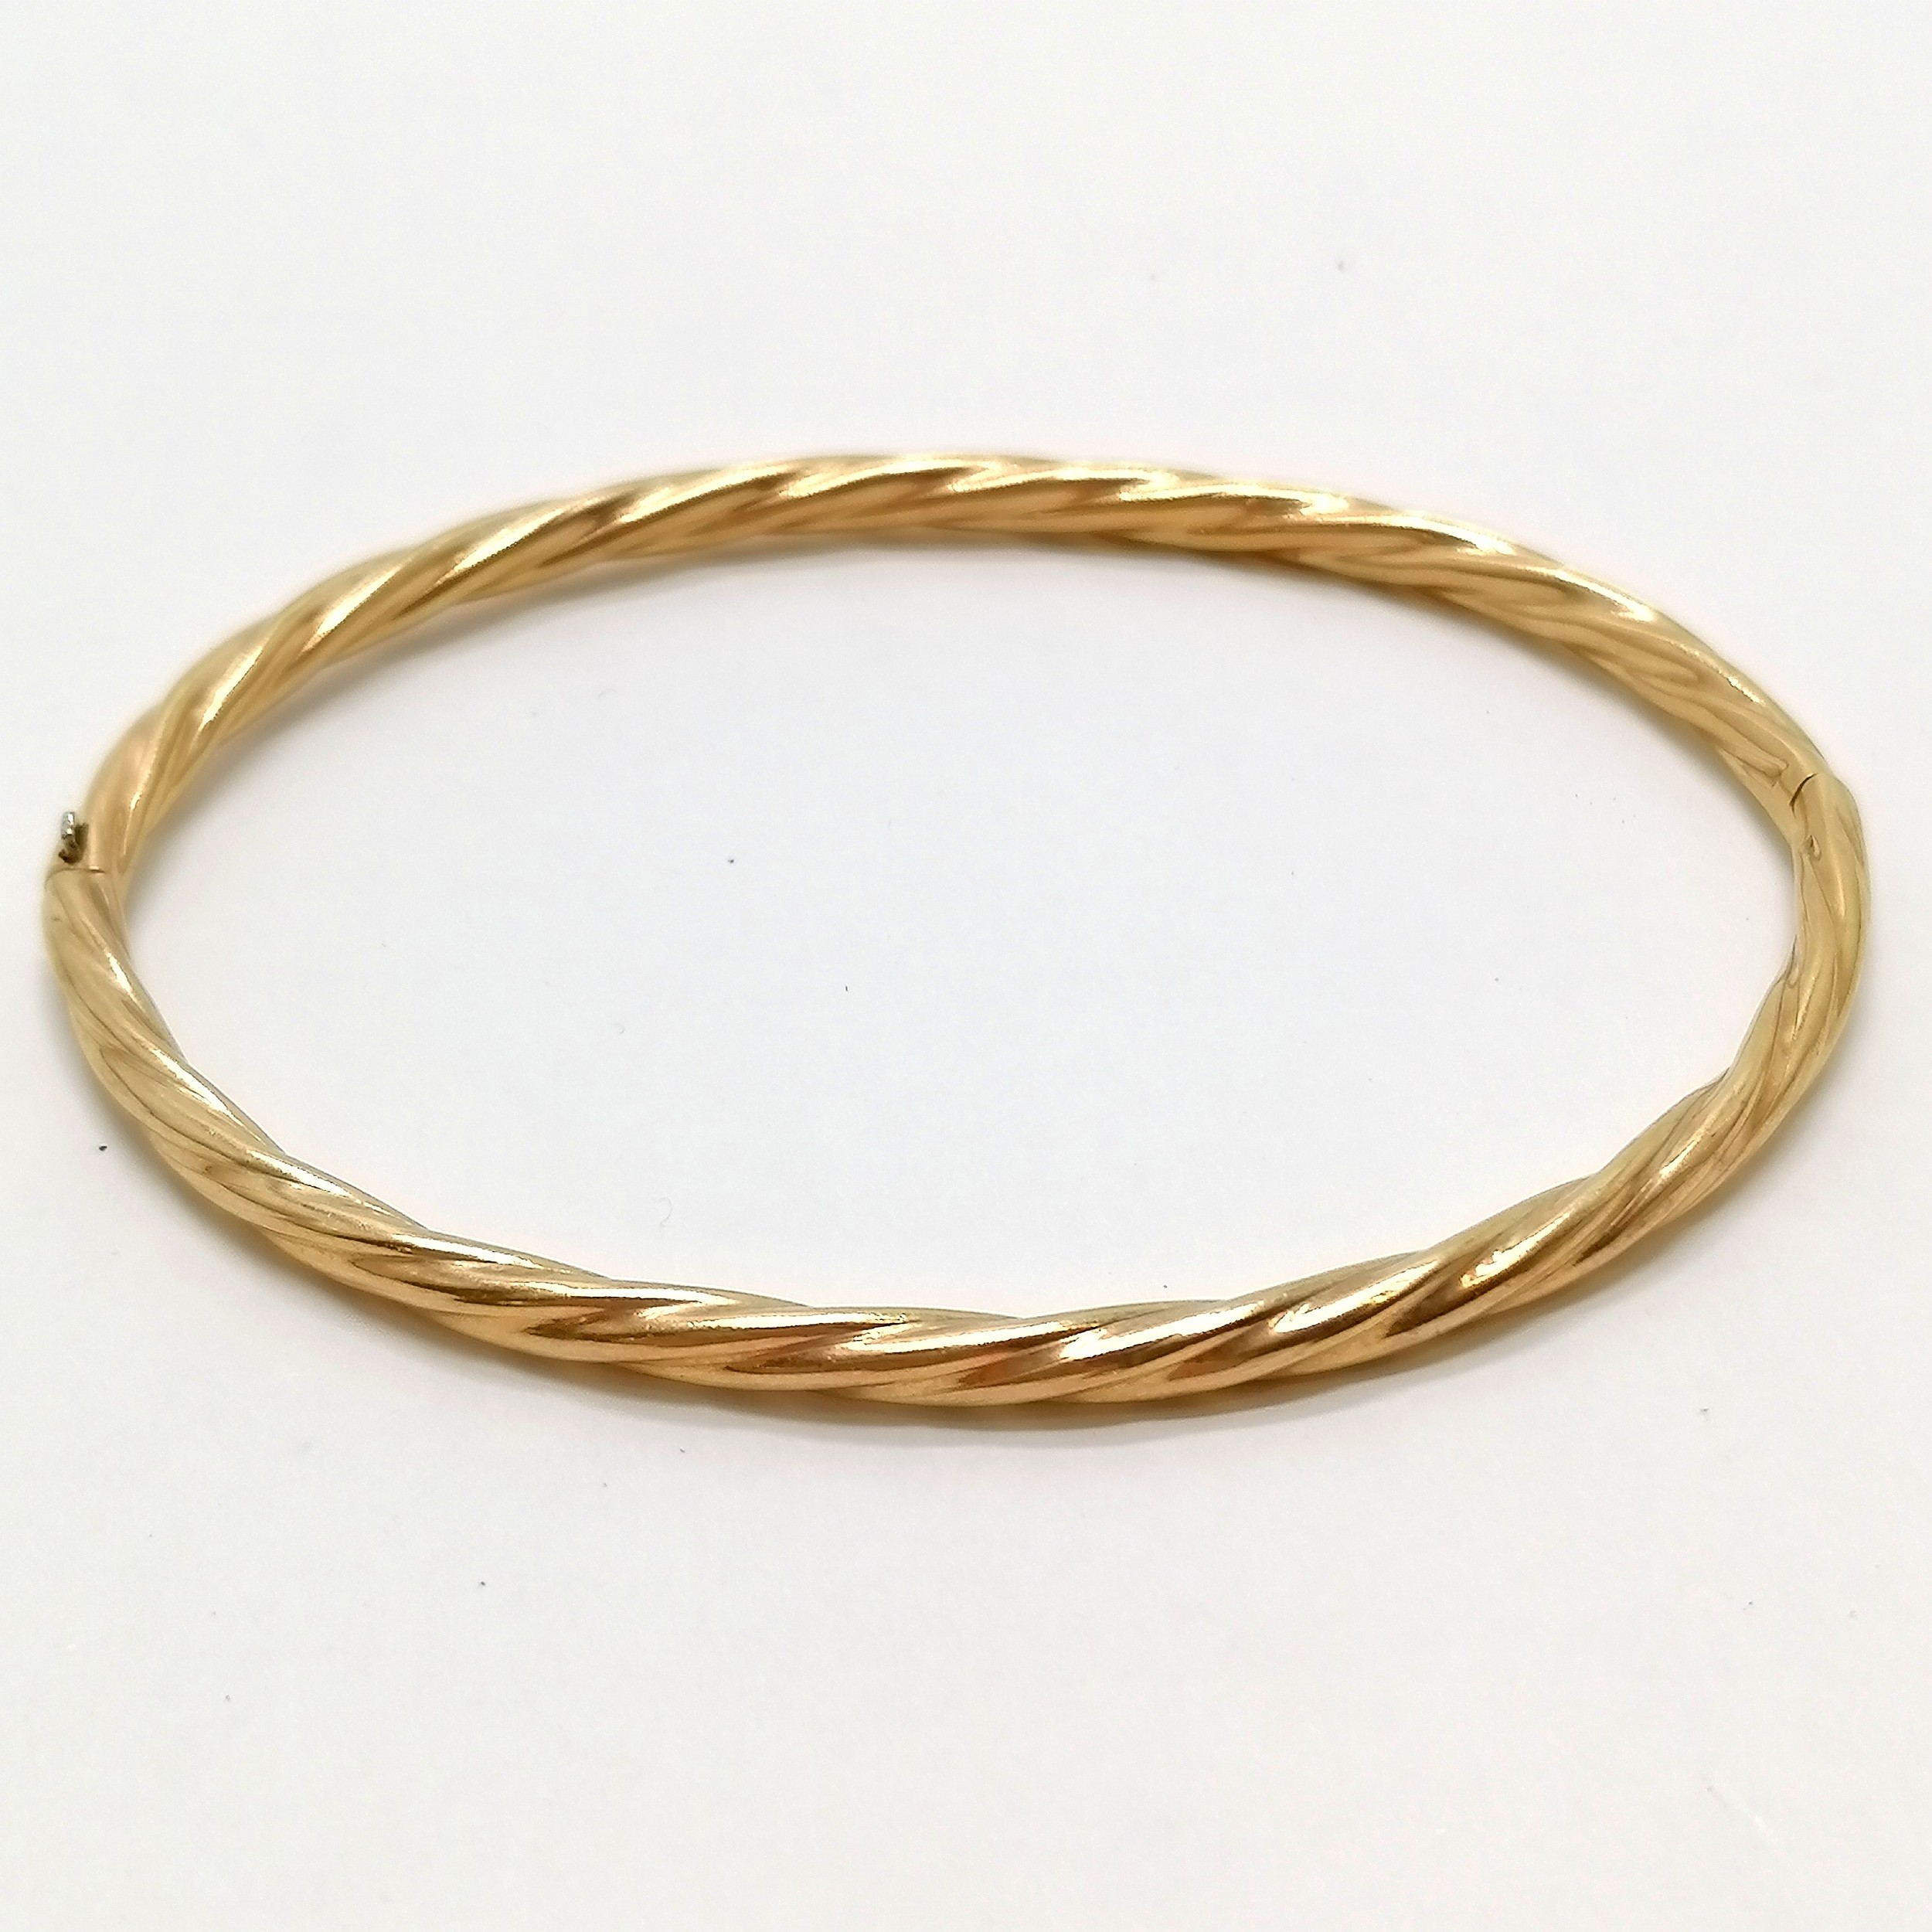 9ct hallmarked gold rope twist bangle with extending white gold mechanism - 4.5g - SOLD ON BEHALF OF